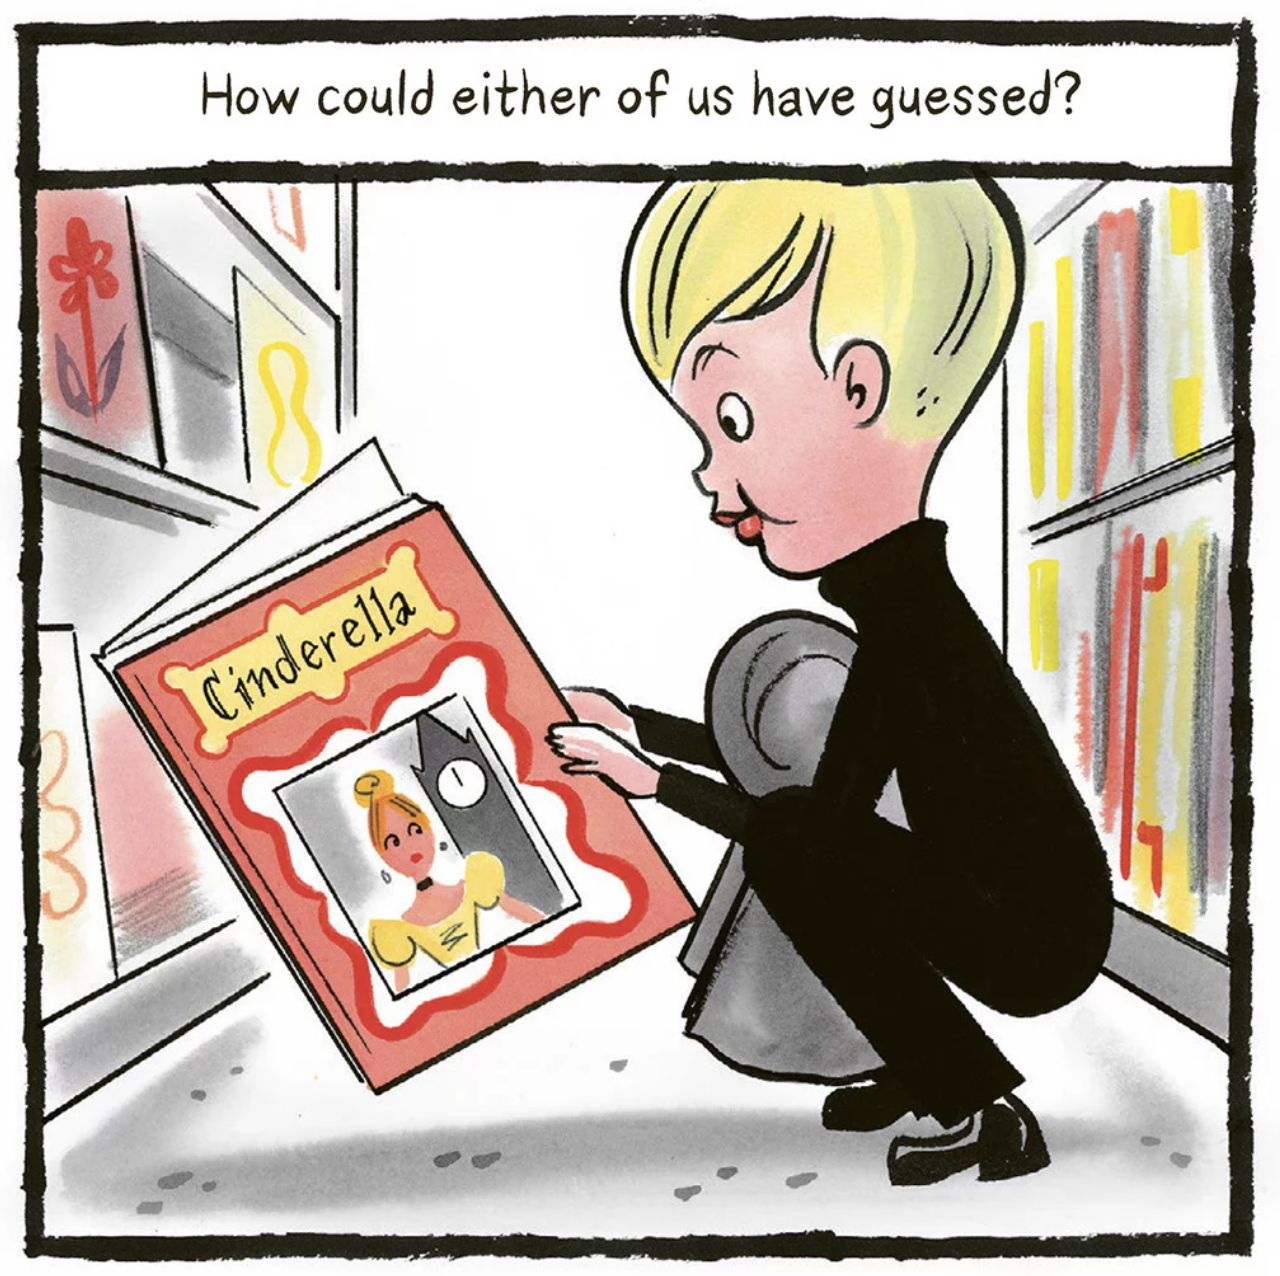 An illustration of a small boy crouched between book cases reading Cinderella.